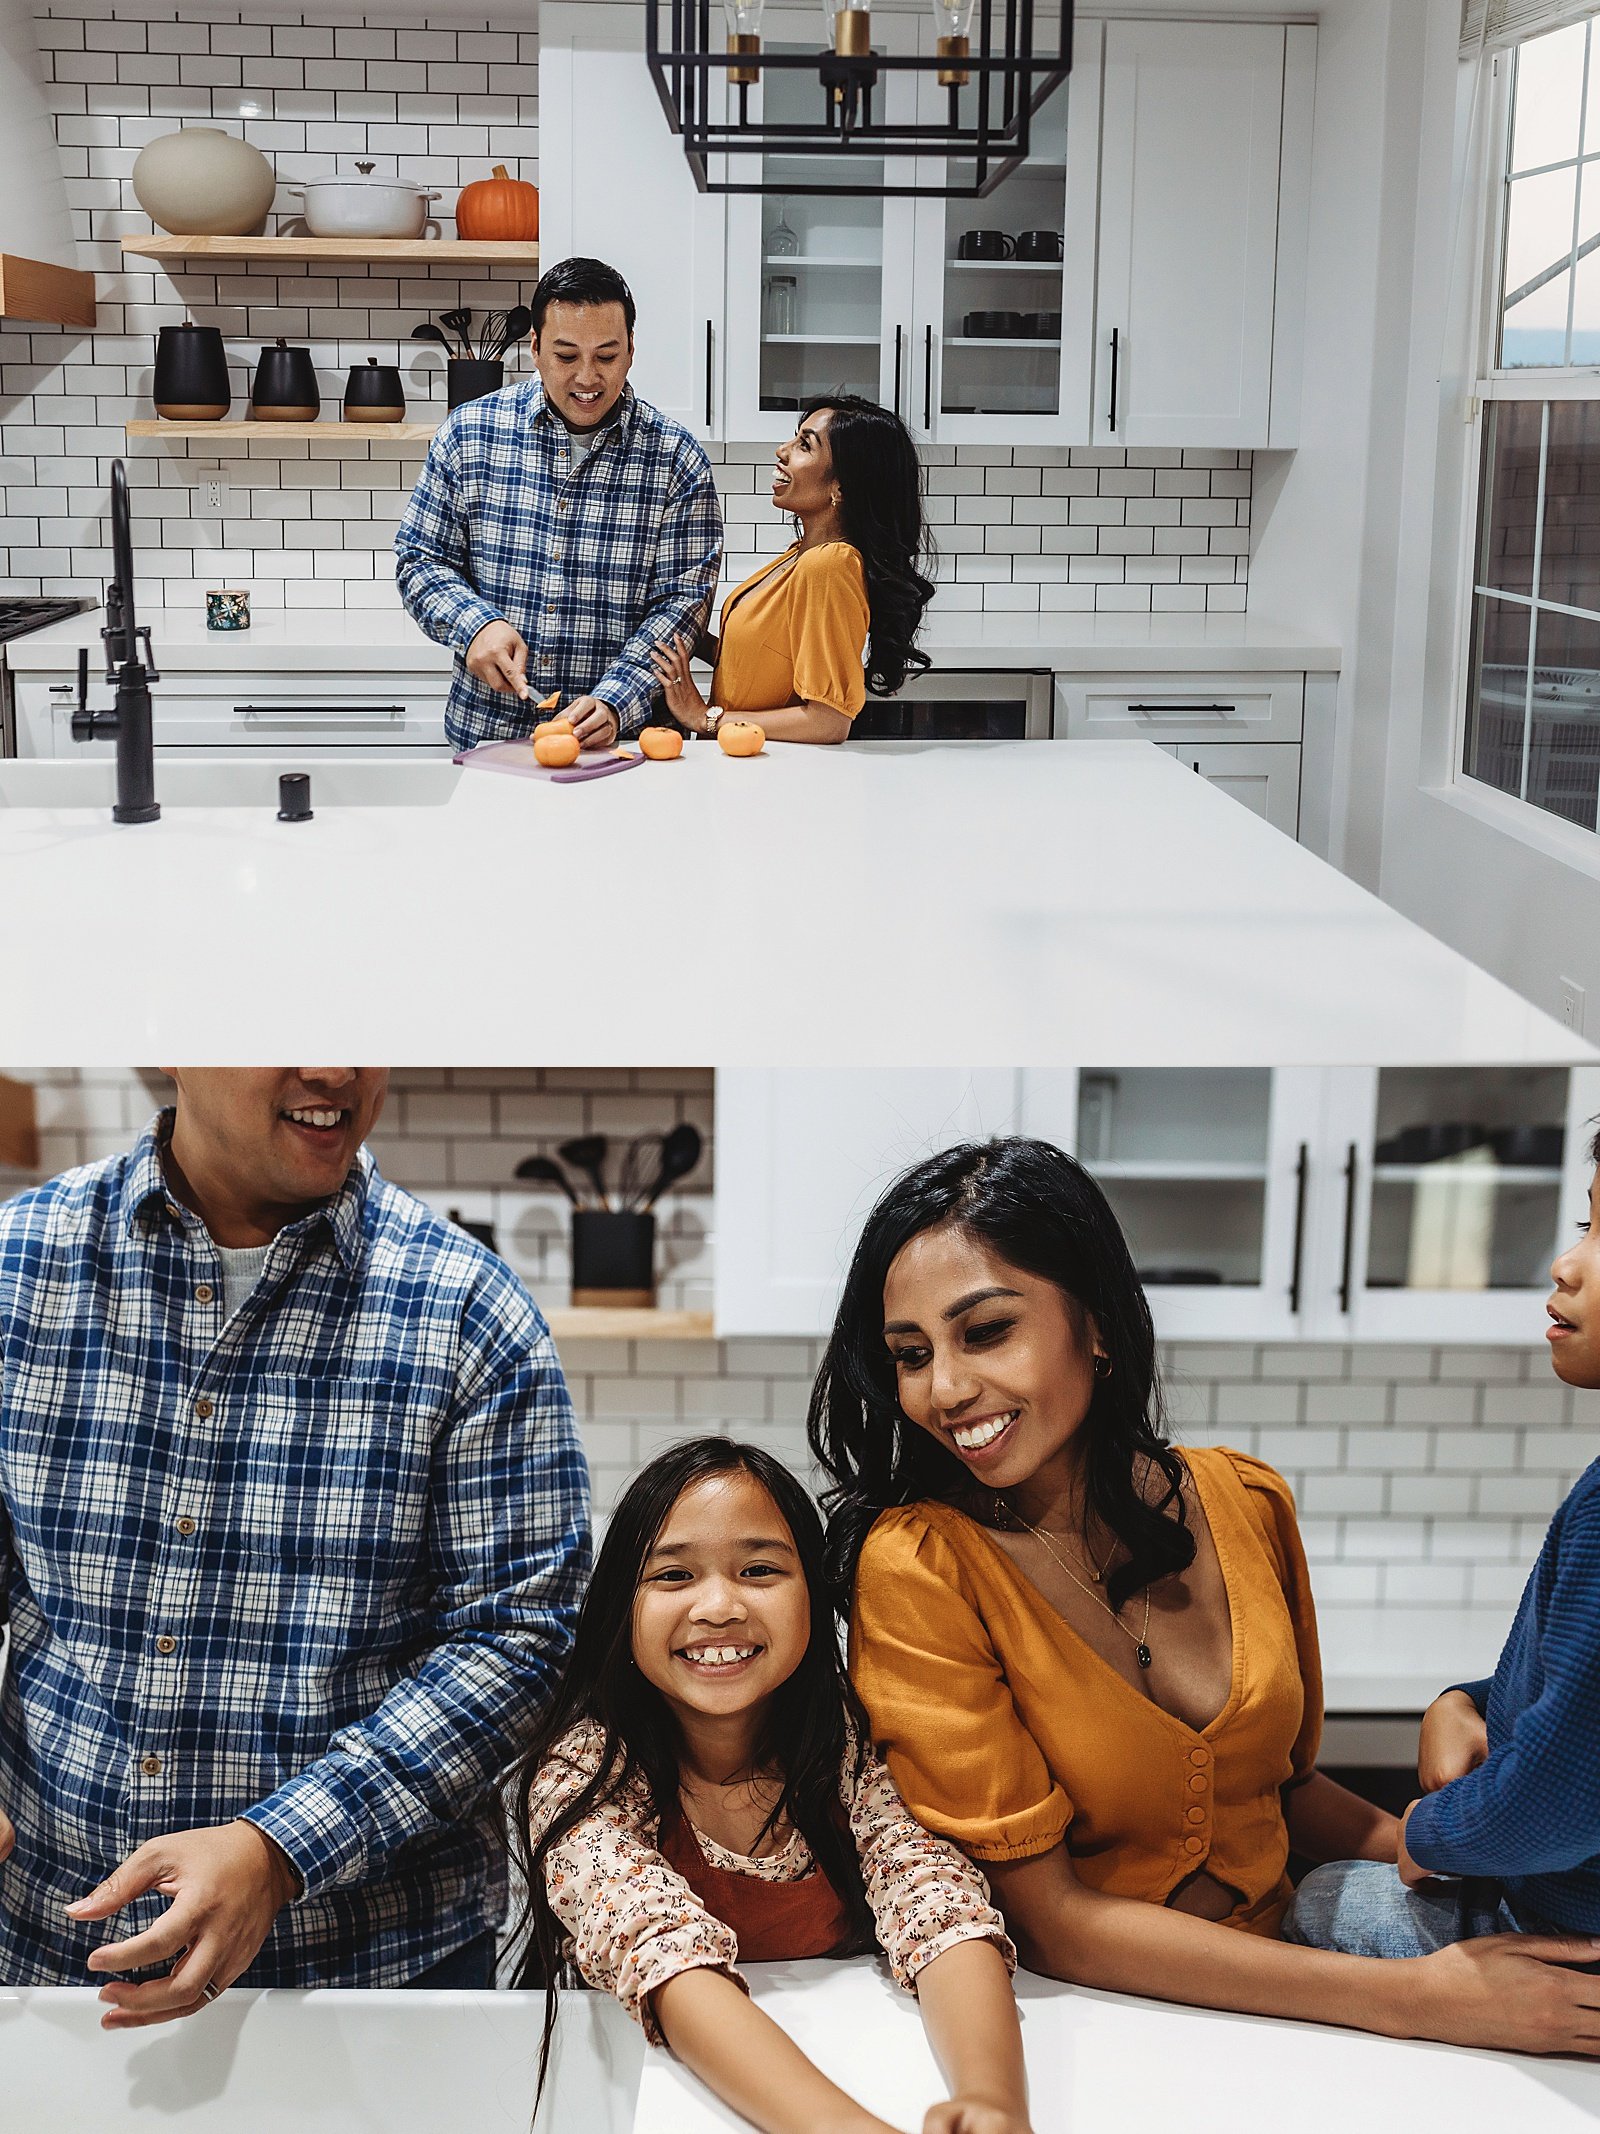  Mom and dad laughing the kitchen for their family photo shoot 